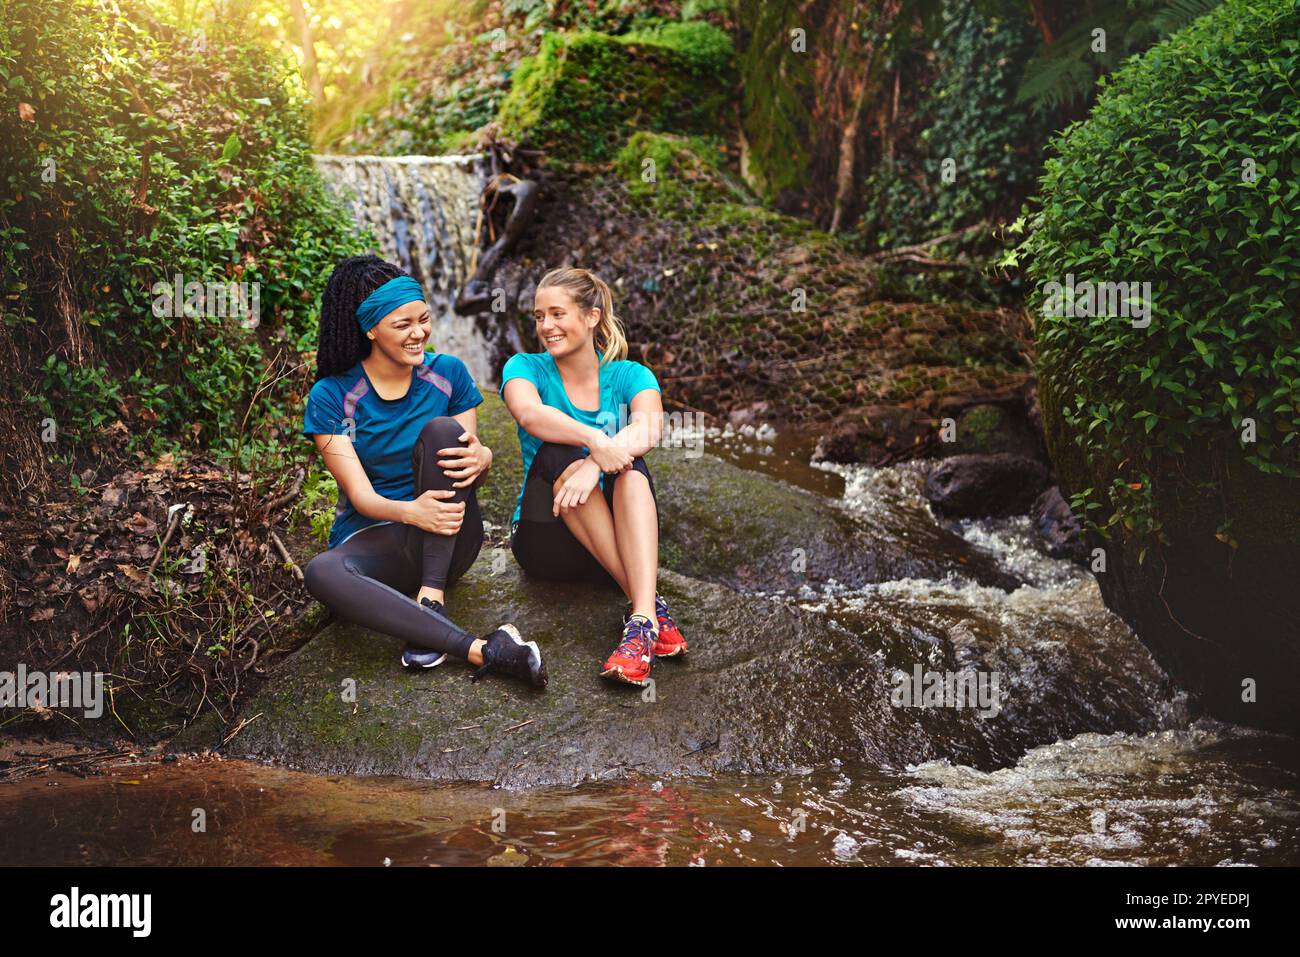 Life is better with a good friend. two sporty young women taking a break while out exercising in nature. Stock Photo